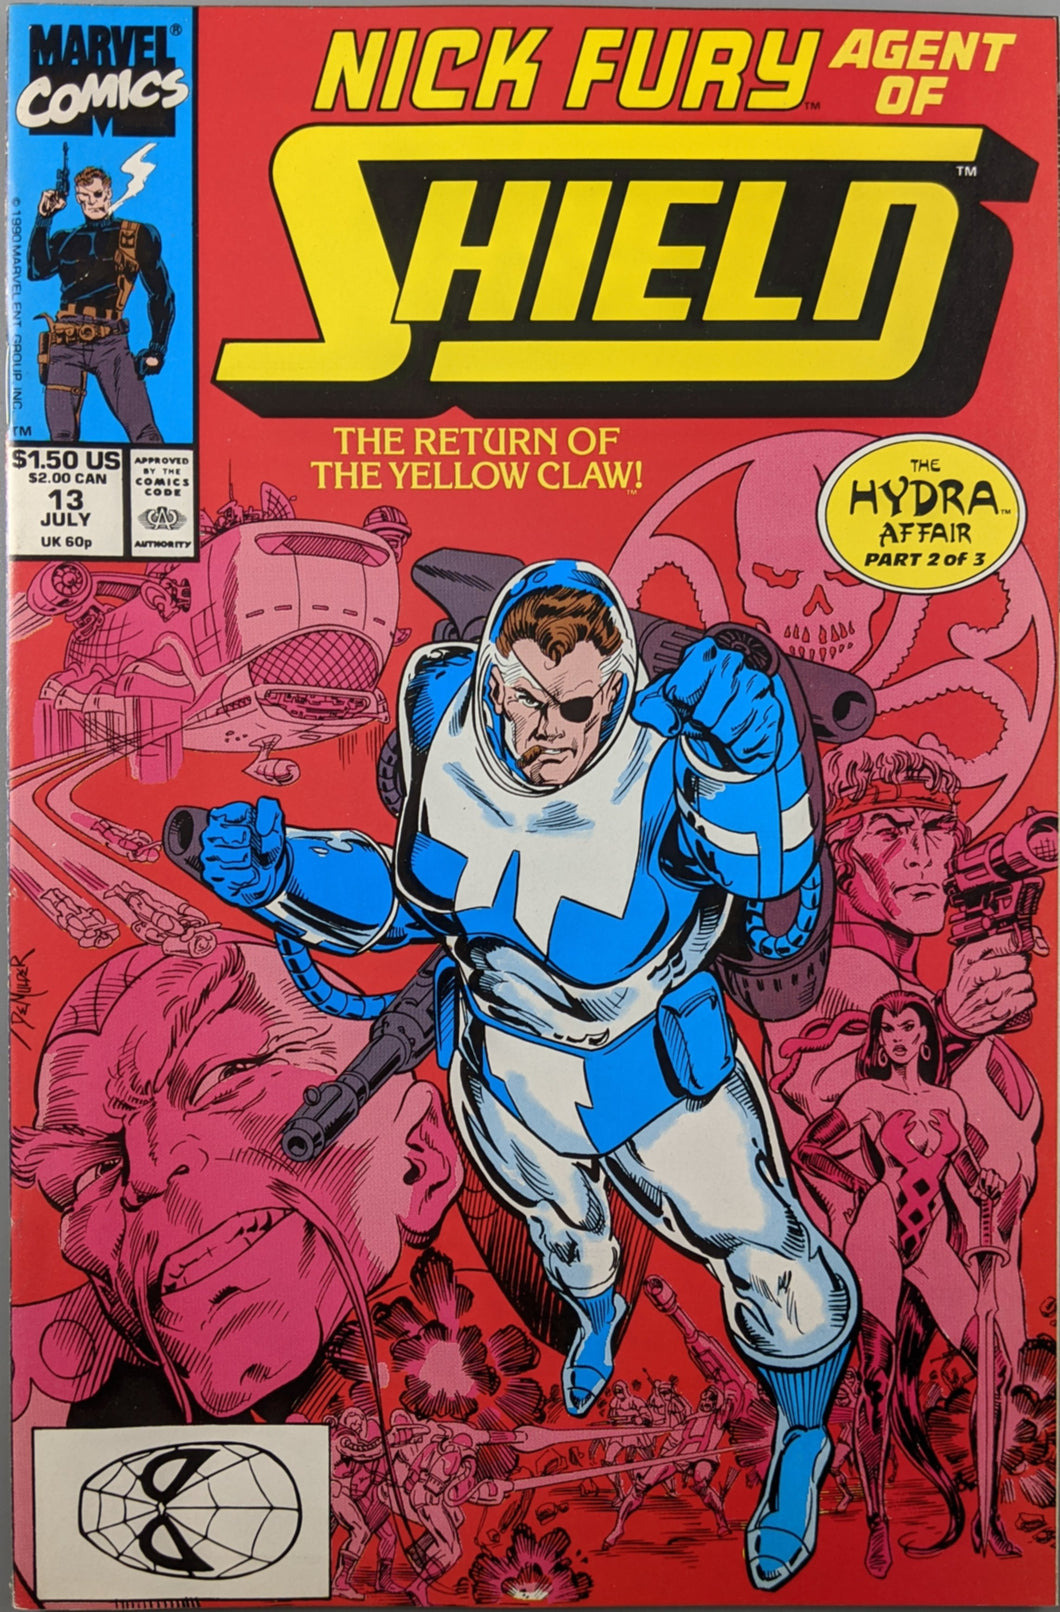 Nick Fury Agent of SHIELD #13 Comic Book Cover Art